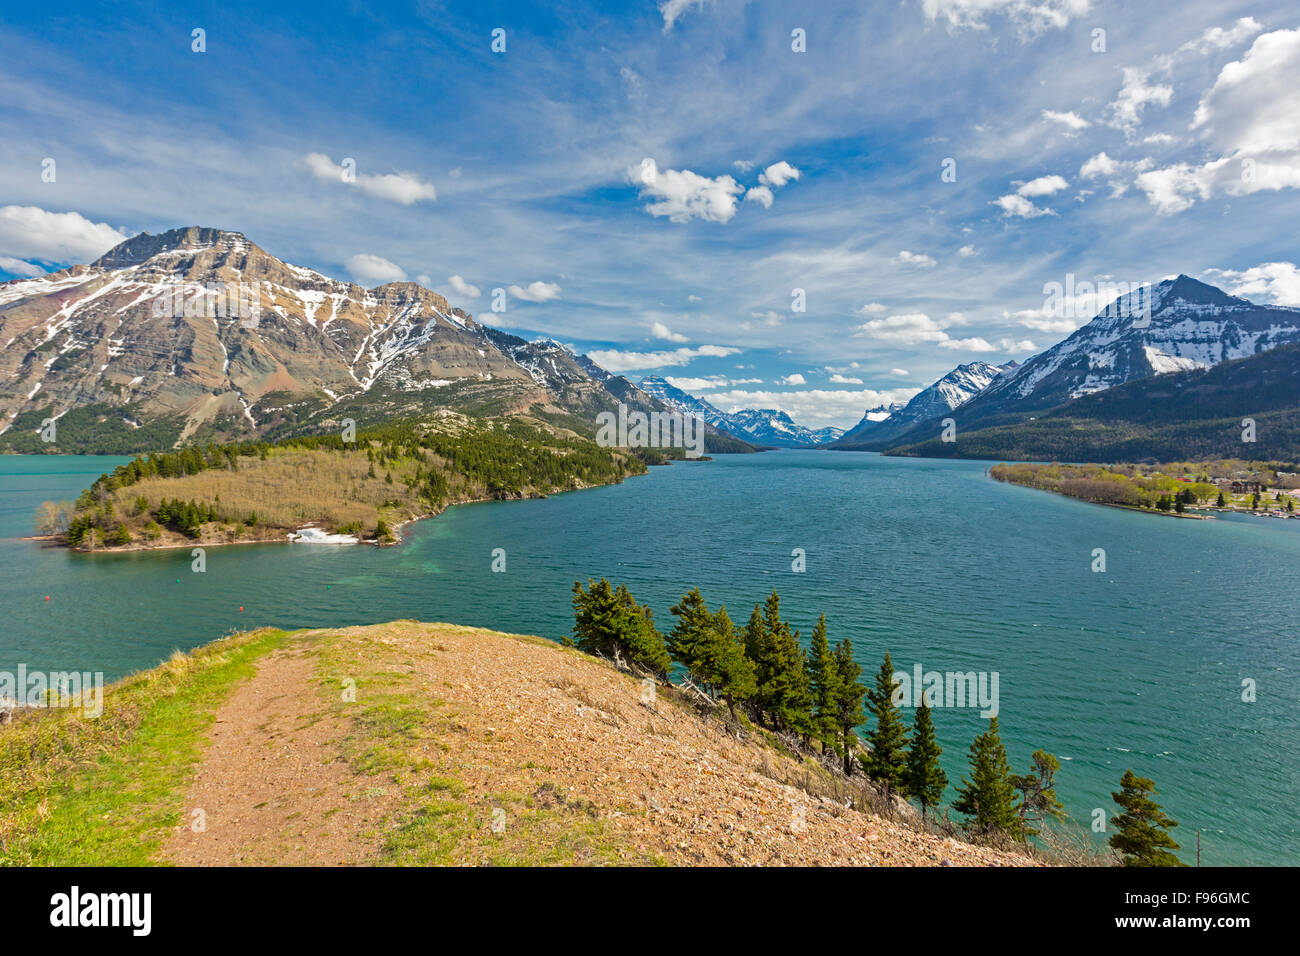 View of Vimy Peak from Prince of Wales Hotel grounds, Waterton Lakes National Park, Alberta, Canada Stock Photo